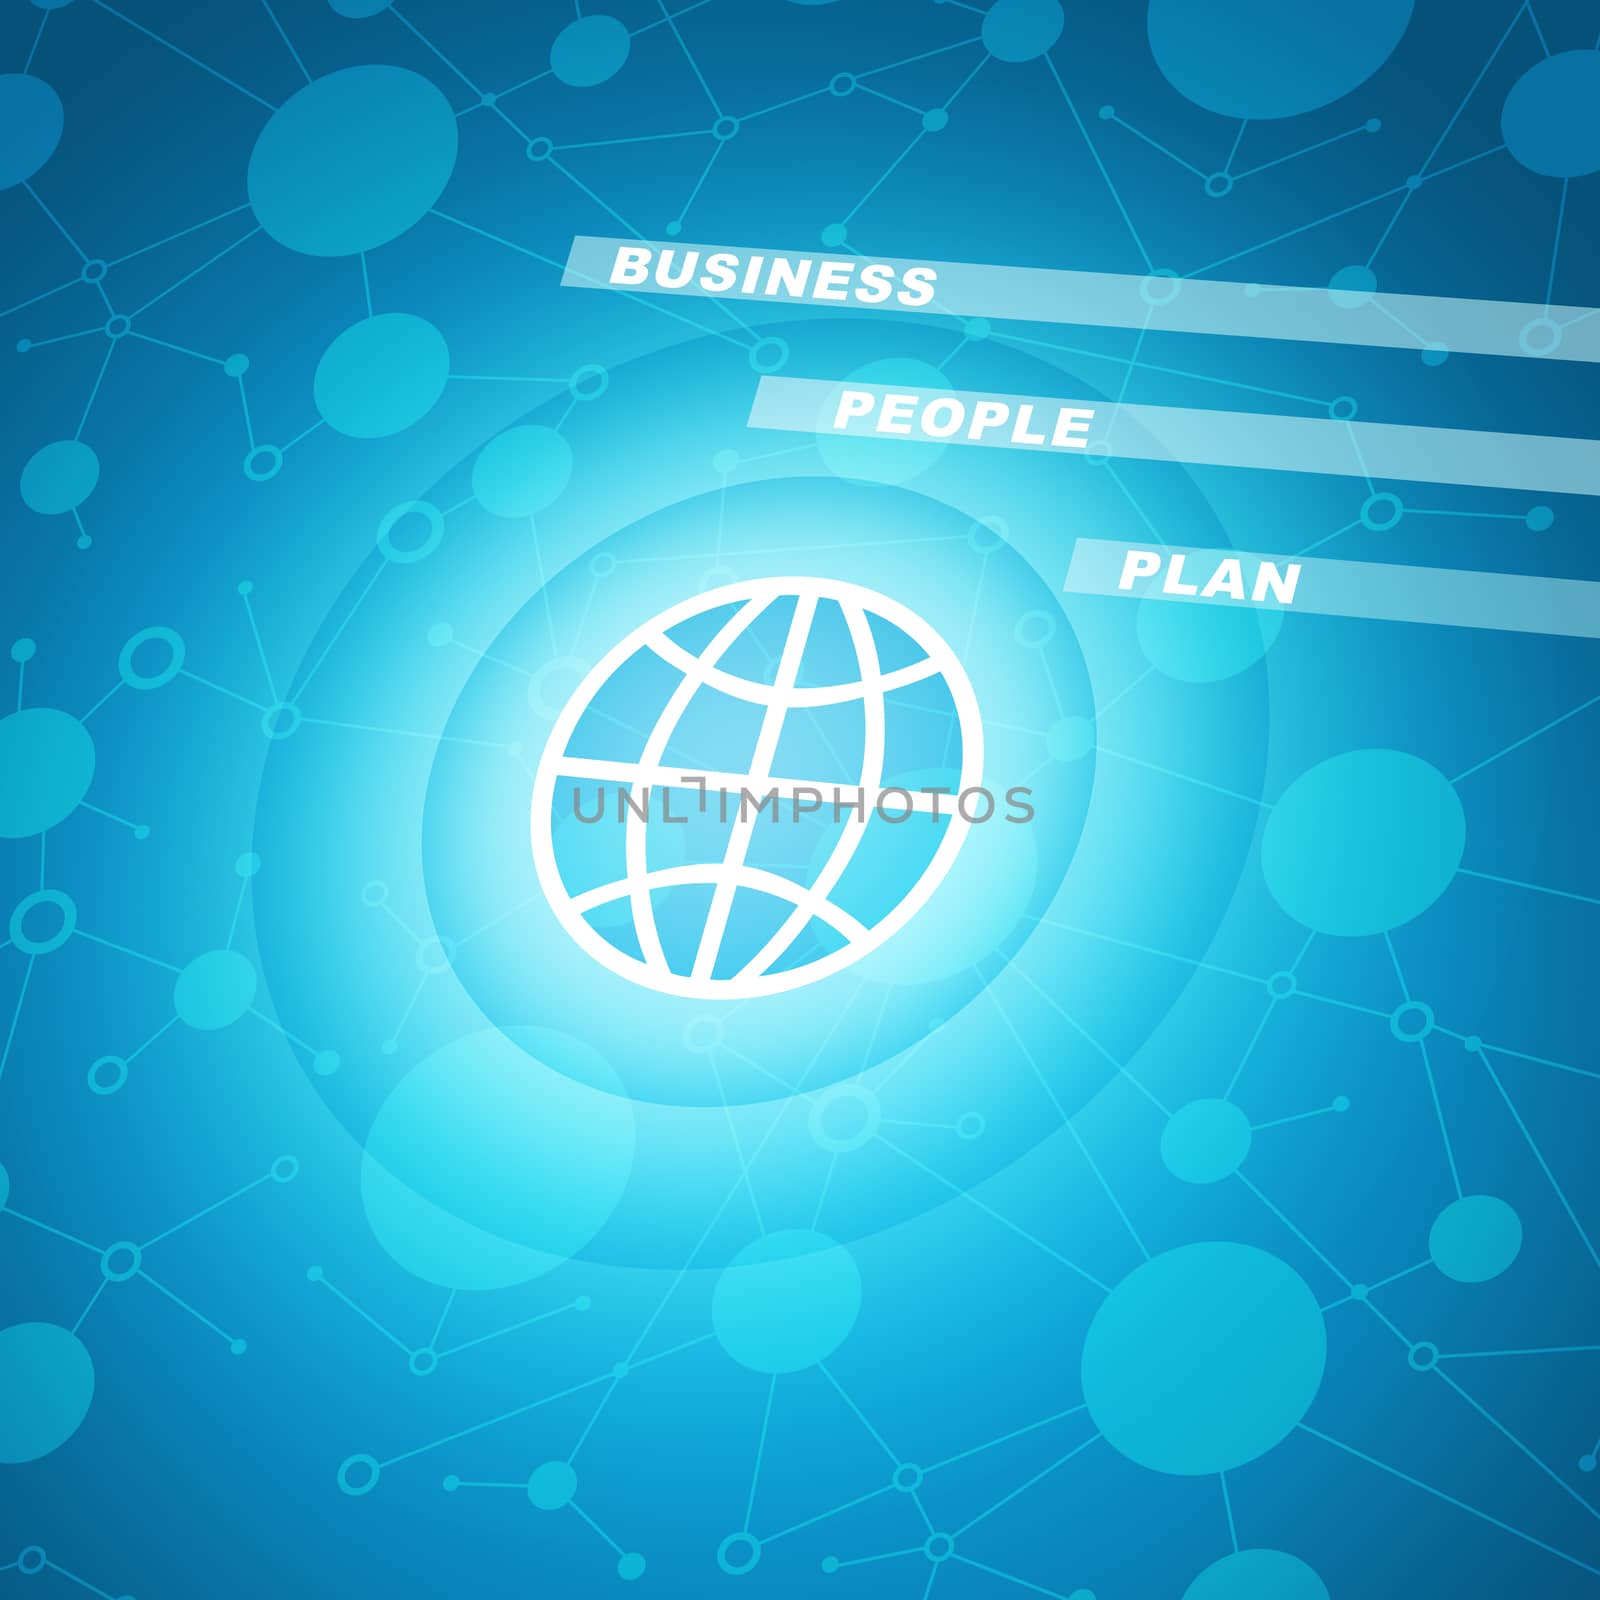 Globe icon with business words on abstract blue background